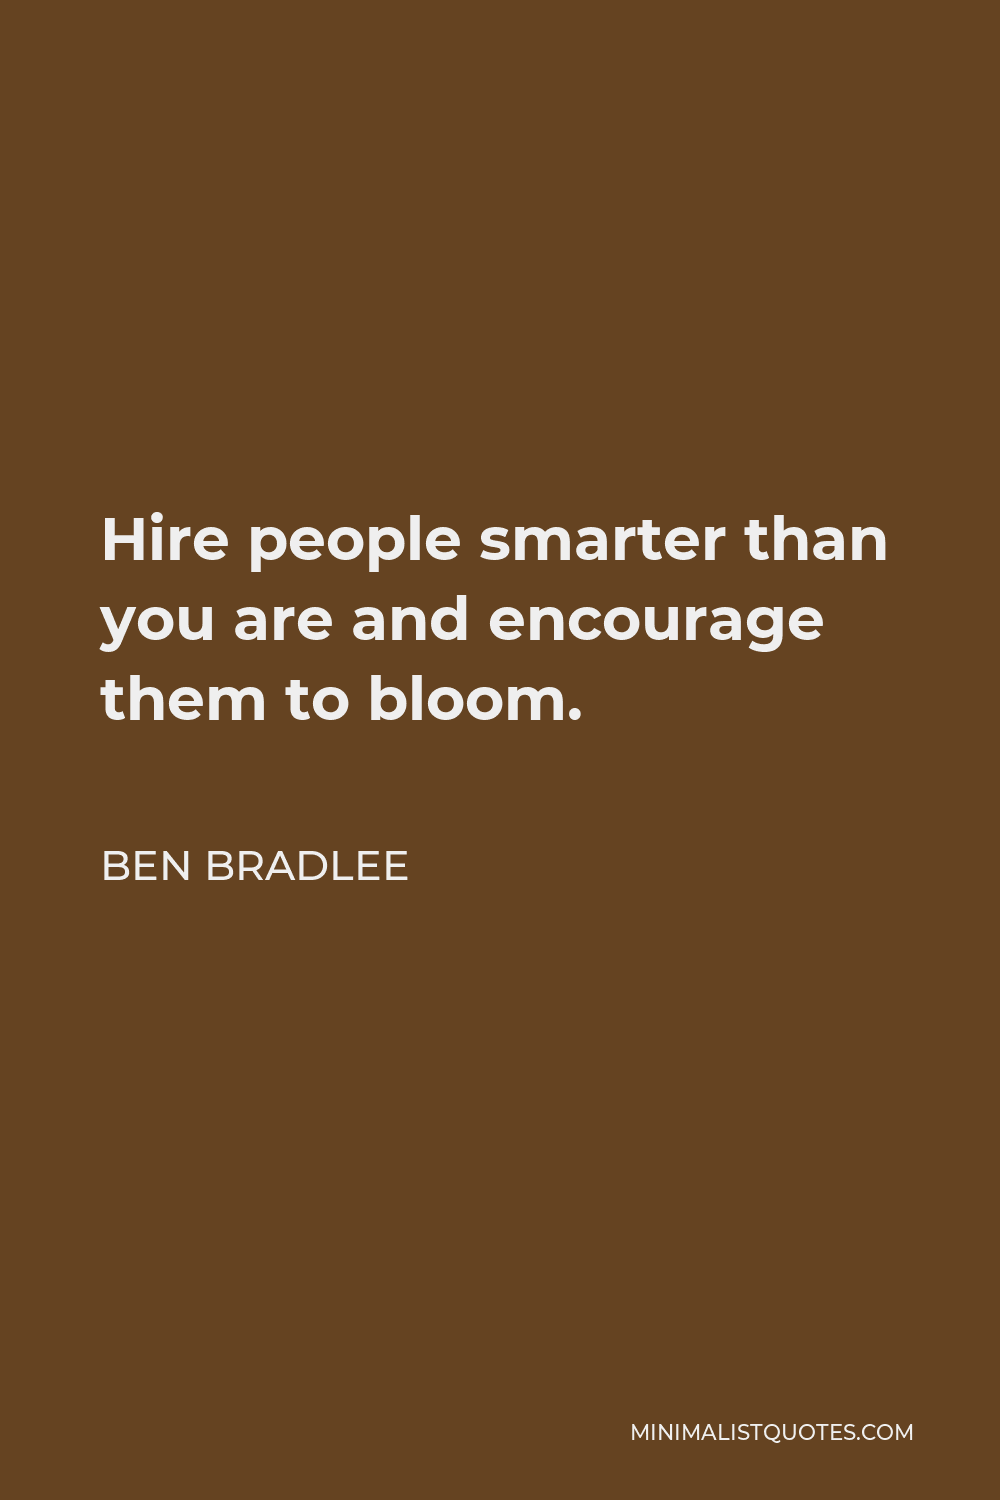 Ben Bradlee Quote - Hire people smarter than you are and encourage them to bloom.